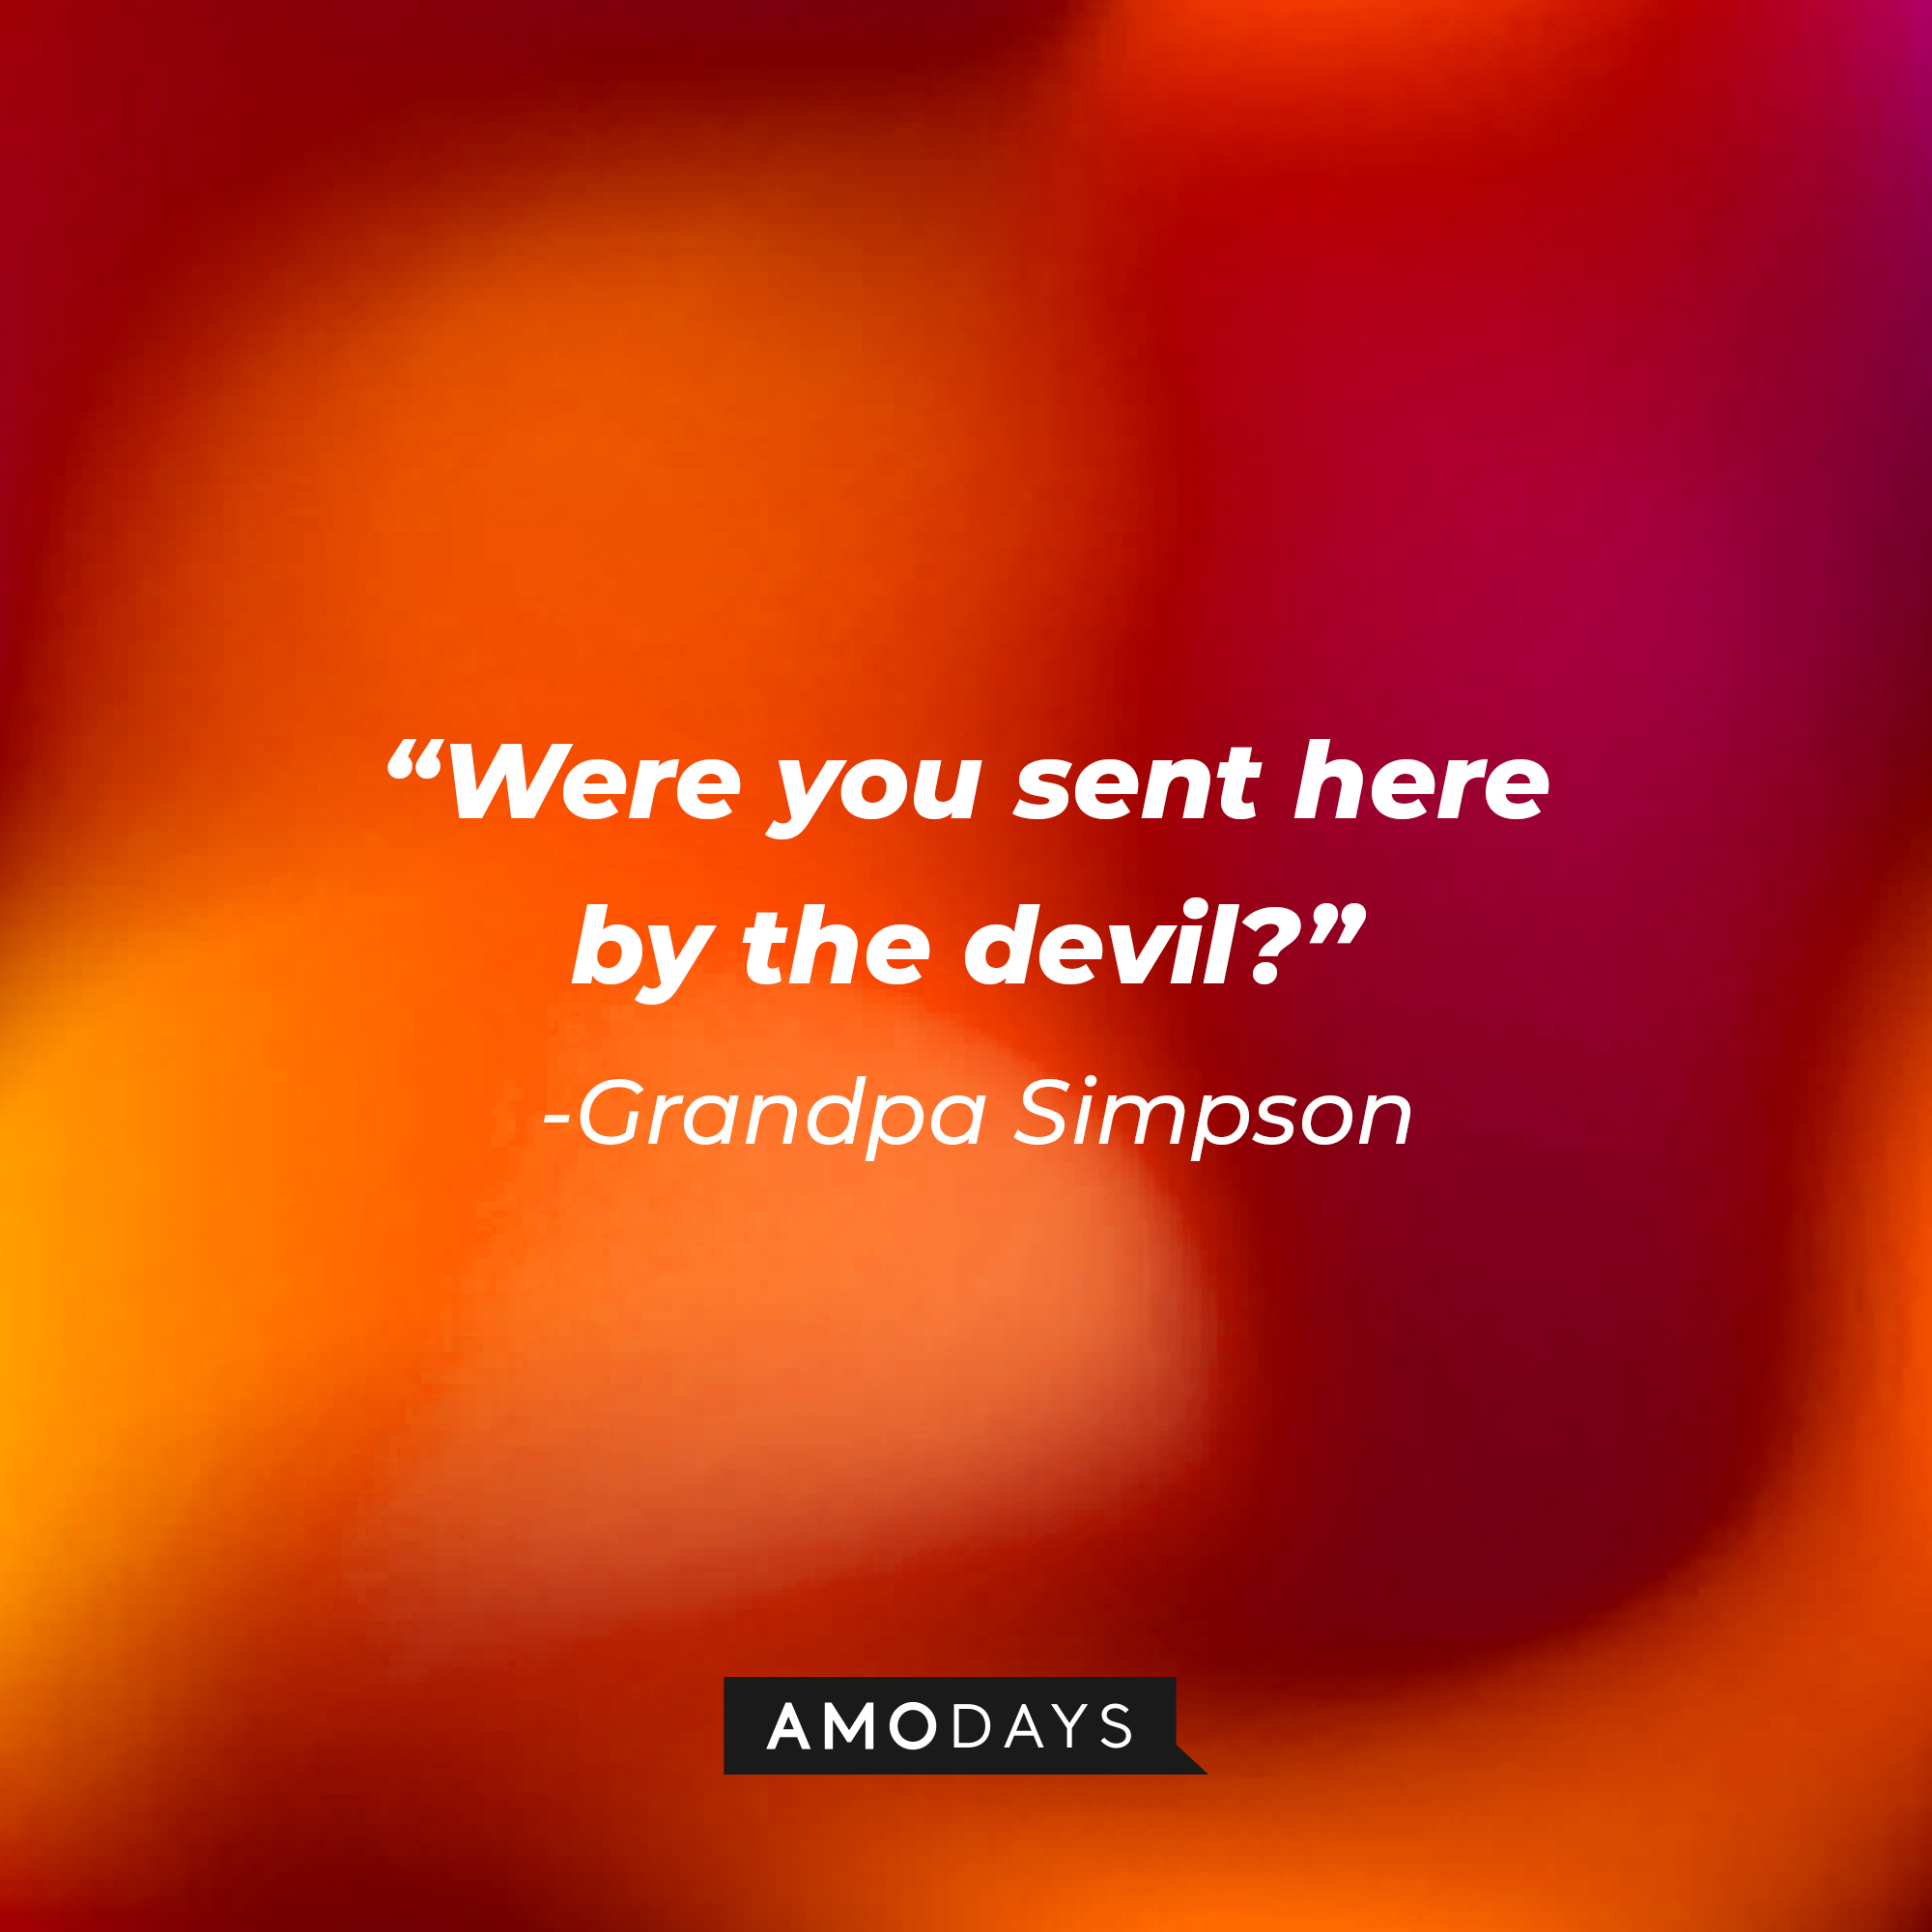 Grandpa Simpson's quote: “Were you sent here by the devil?” | Source: AmoDays